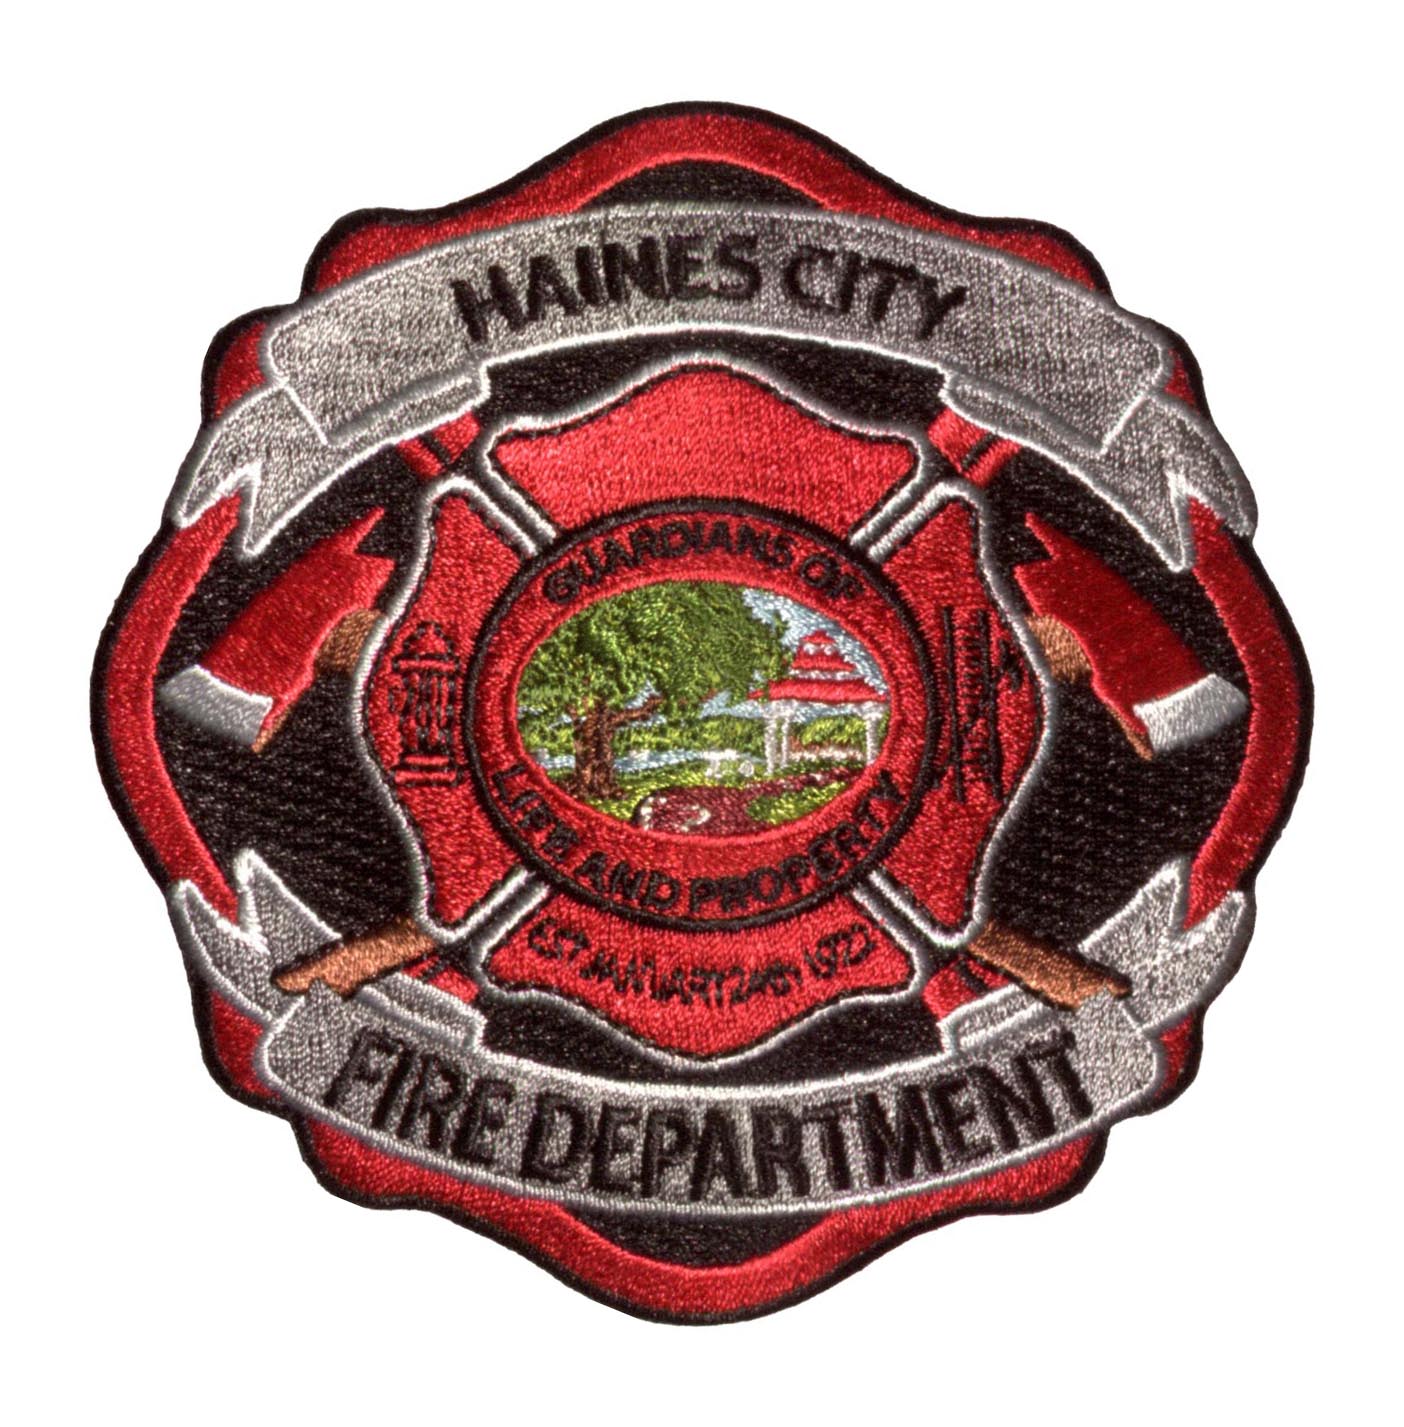 Fire Department patches